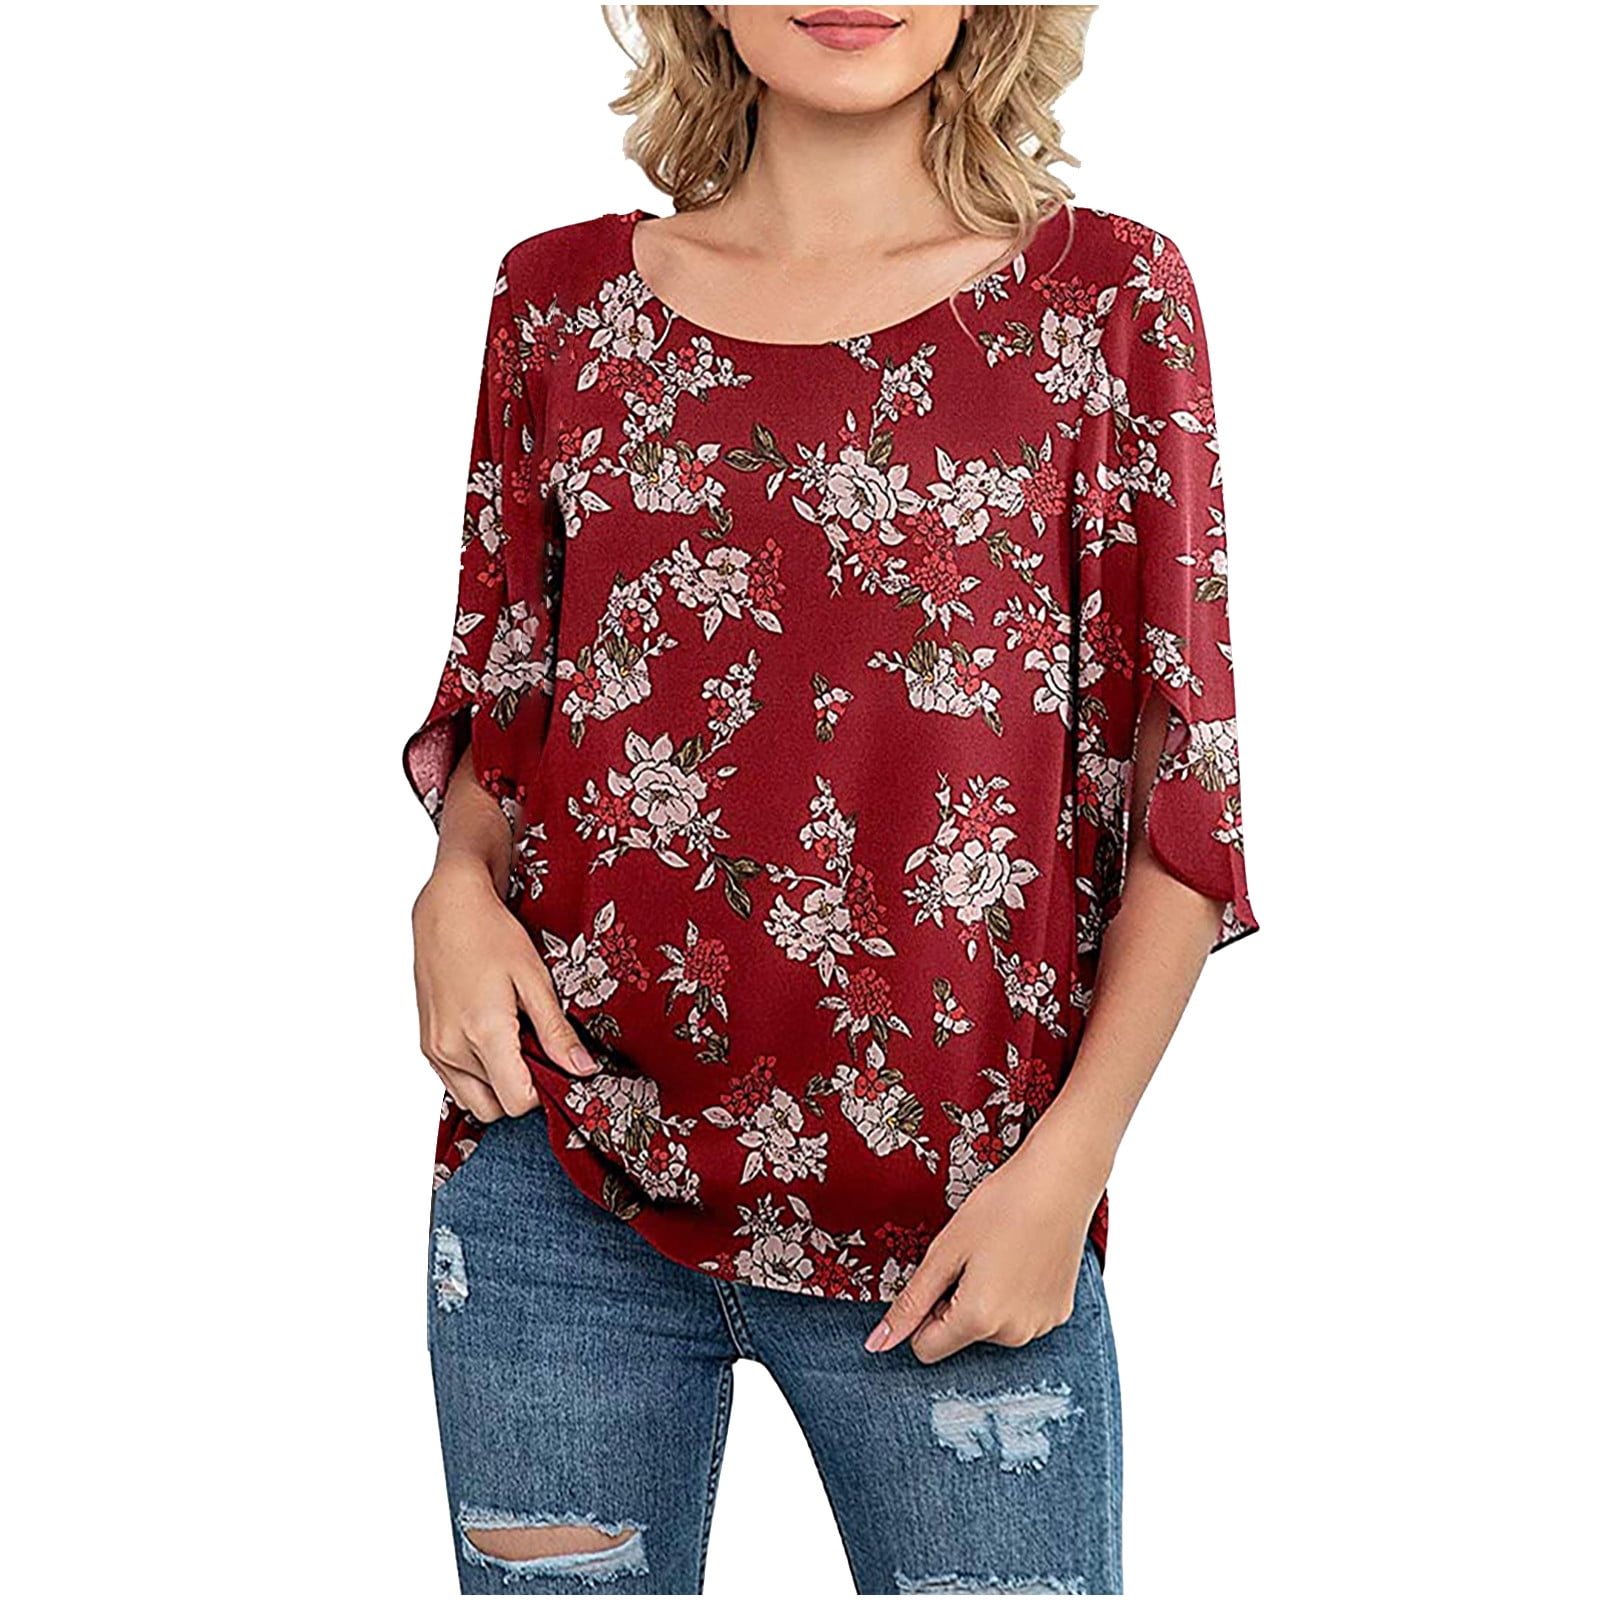 Mnjin Summer T Shirts Women Tops Womens Casual Floral Printed Crew Neck  Loose 3/4 Sleeve Chiffon Blouse Tops Tshirts Ladies Tee Shirts Red XL -  Walmart.com